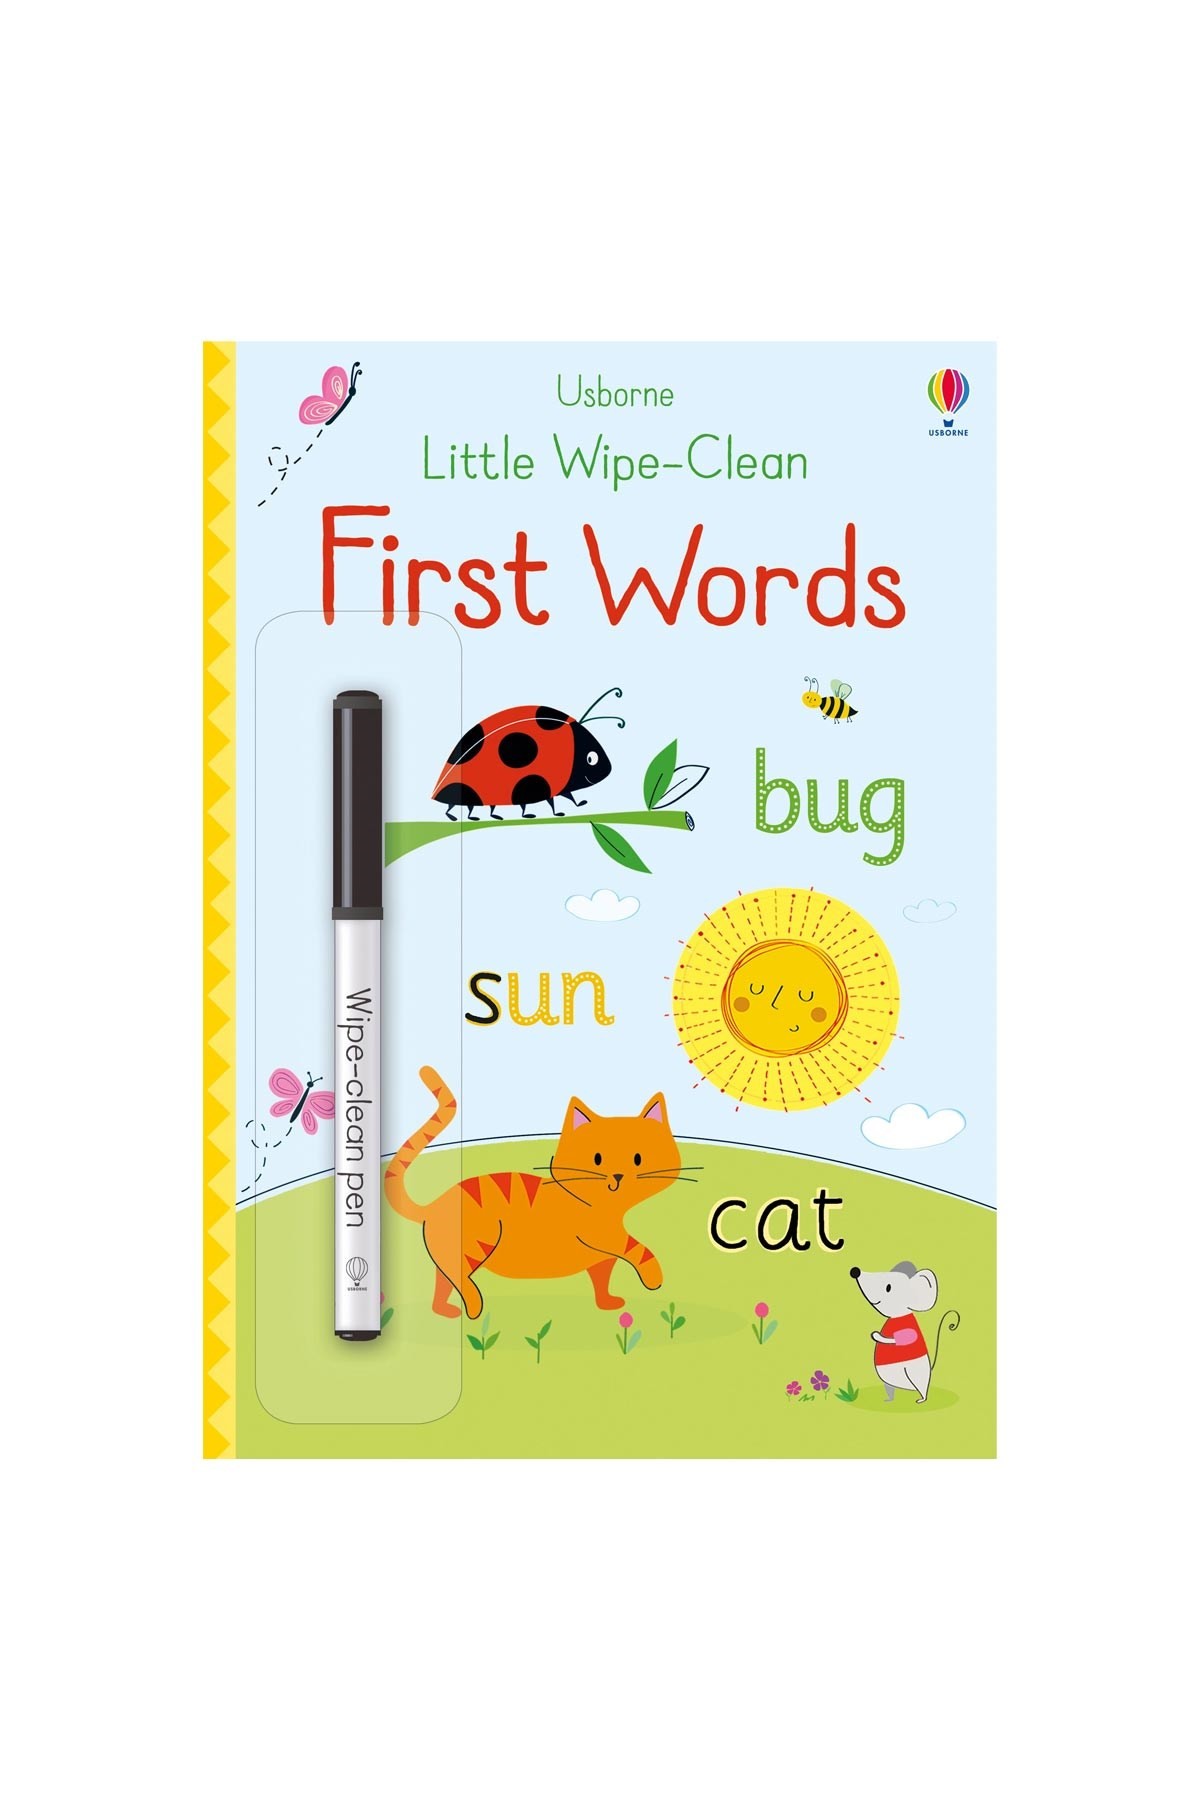 The Usborne Little Wipe-Clean First Words